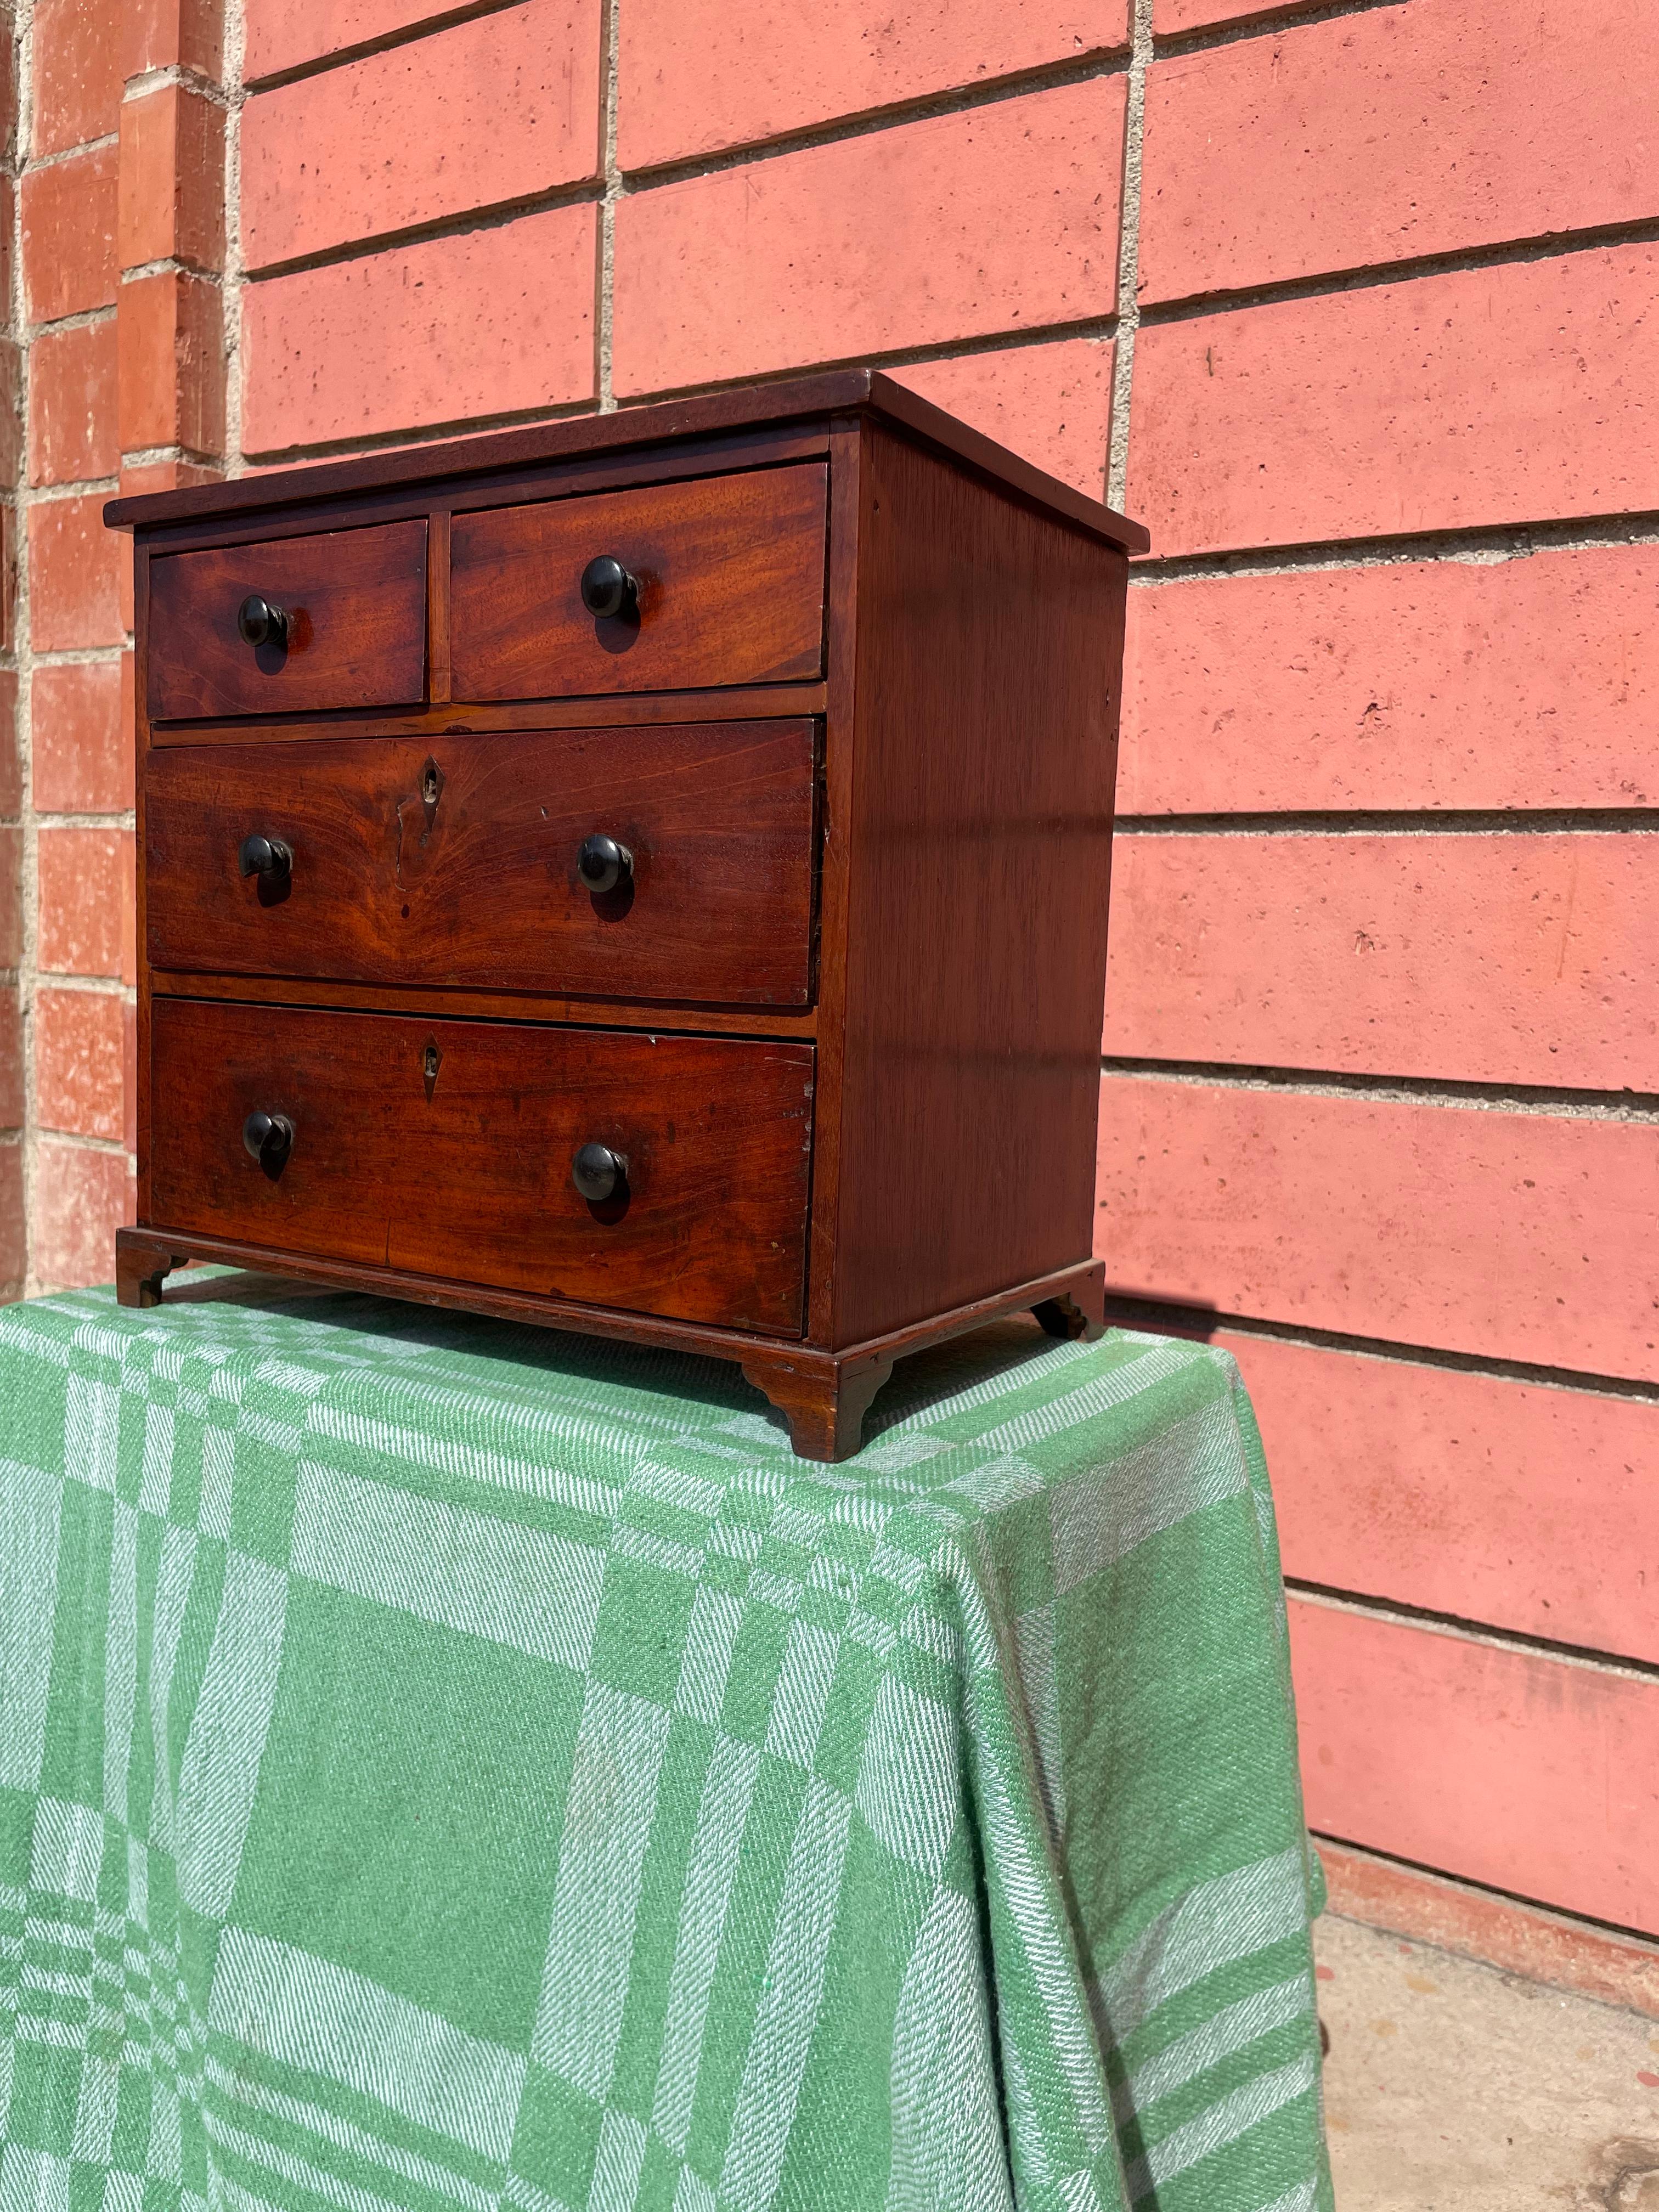 This early 19th century Georgian Miniature Chest of Drawers would have been constructed by the workshop to show potential clients examples of their products. Made from sturdy mahogany wood, raised on small detailed braket feet, hand carved-wooden